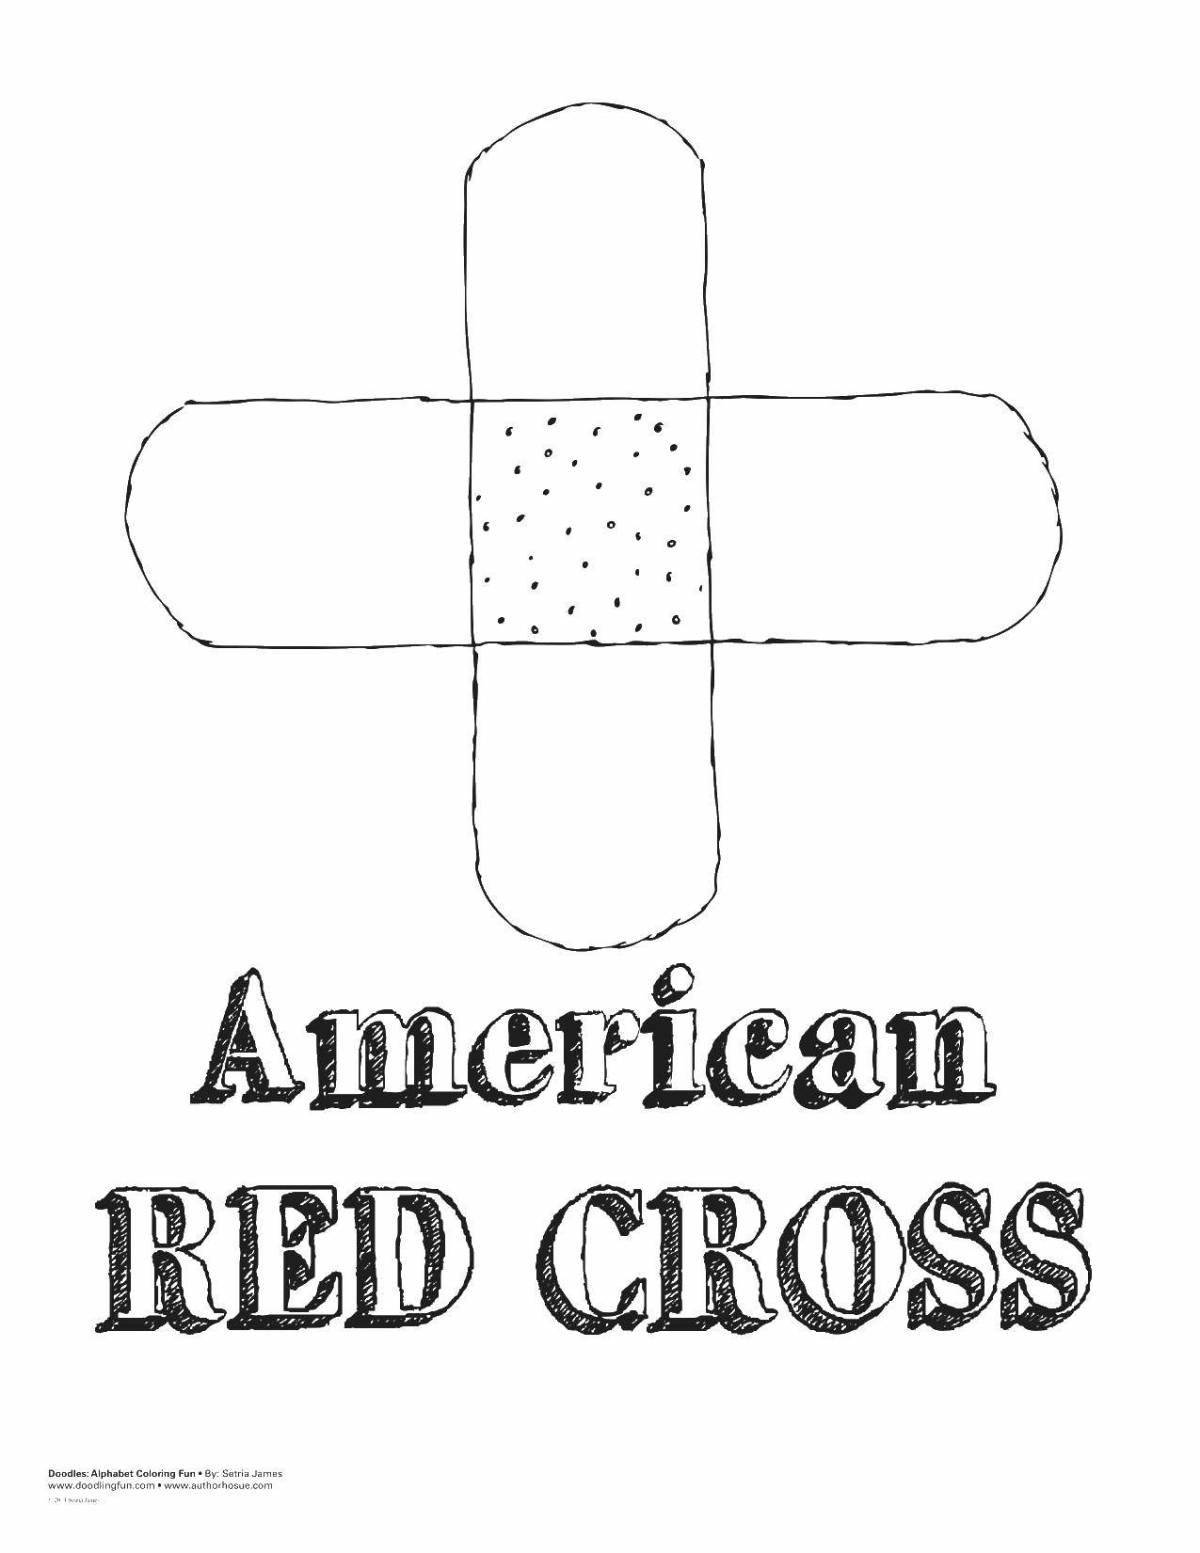 Awesome red cross coloring page